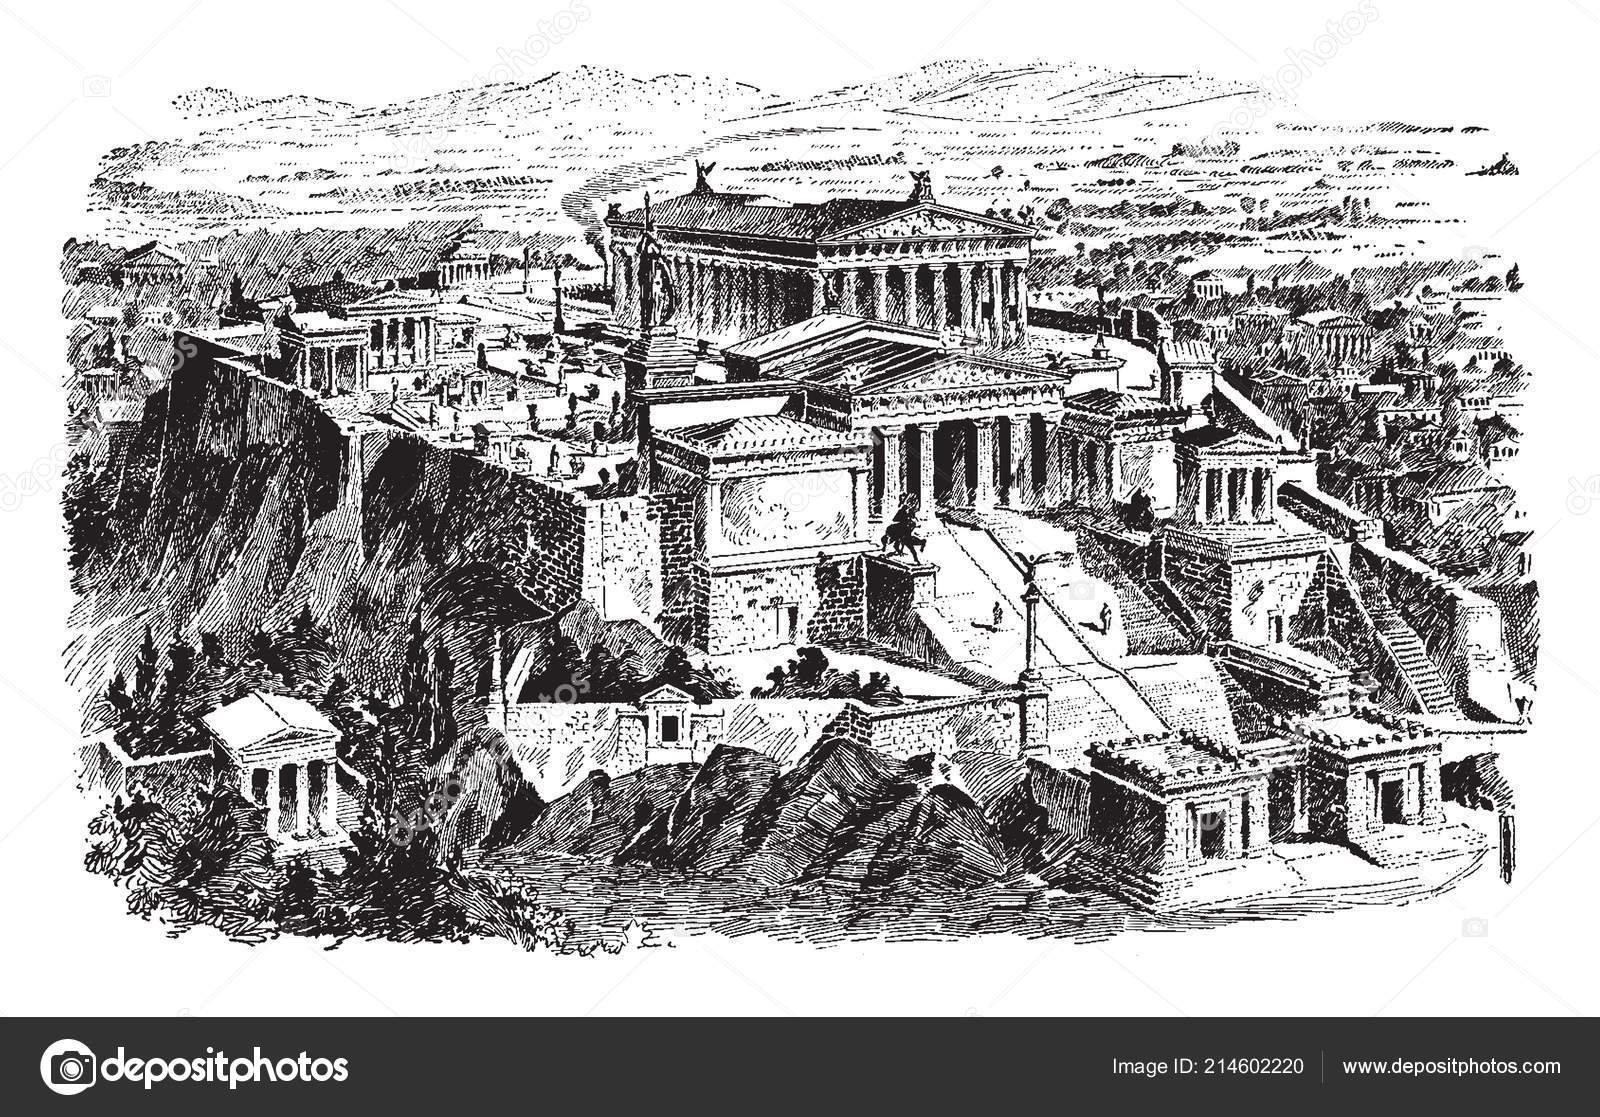 Ancient Greece: Visiting the Acropolis of Athens | Athsenser